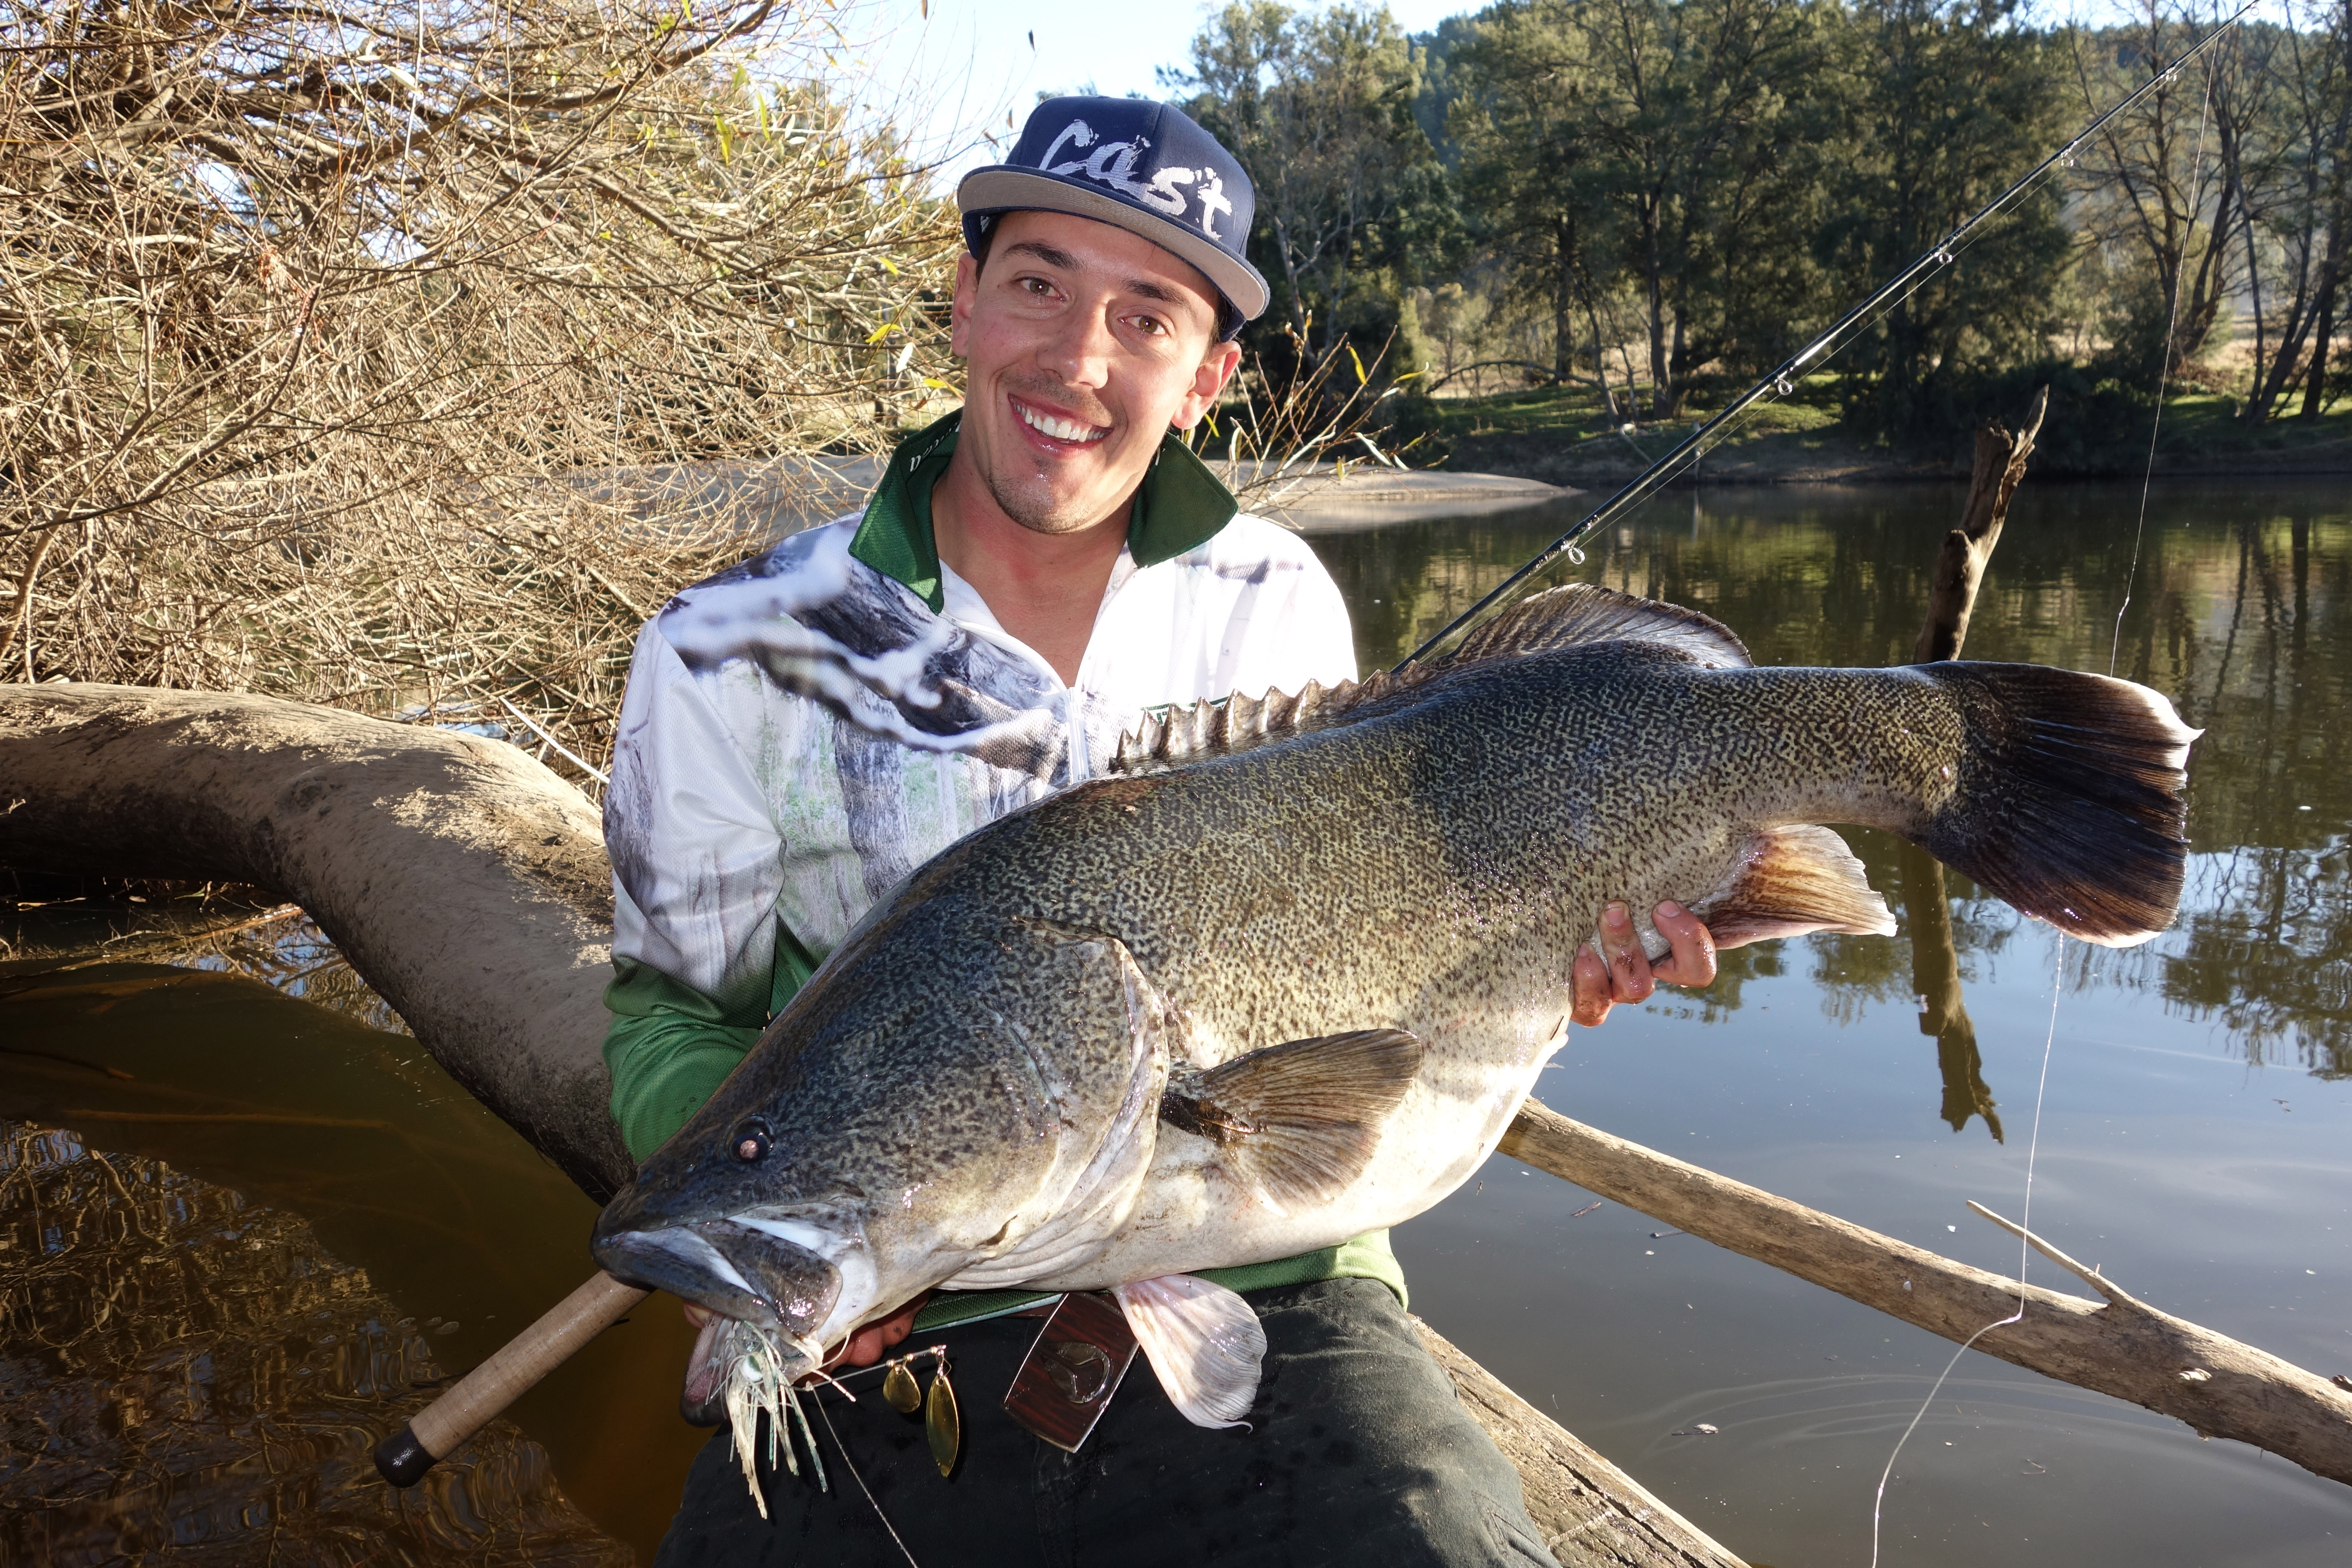 An angler on the Murrumbidgee River with a 105cm Murray Cod - Photo credit Chris Cleaver